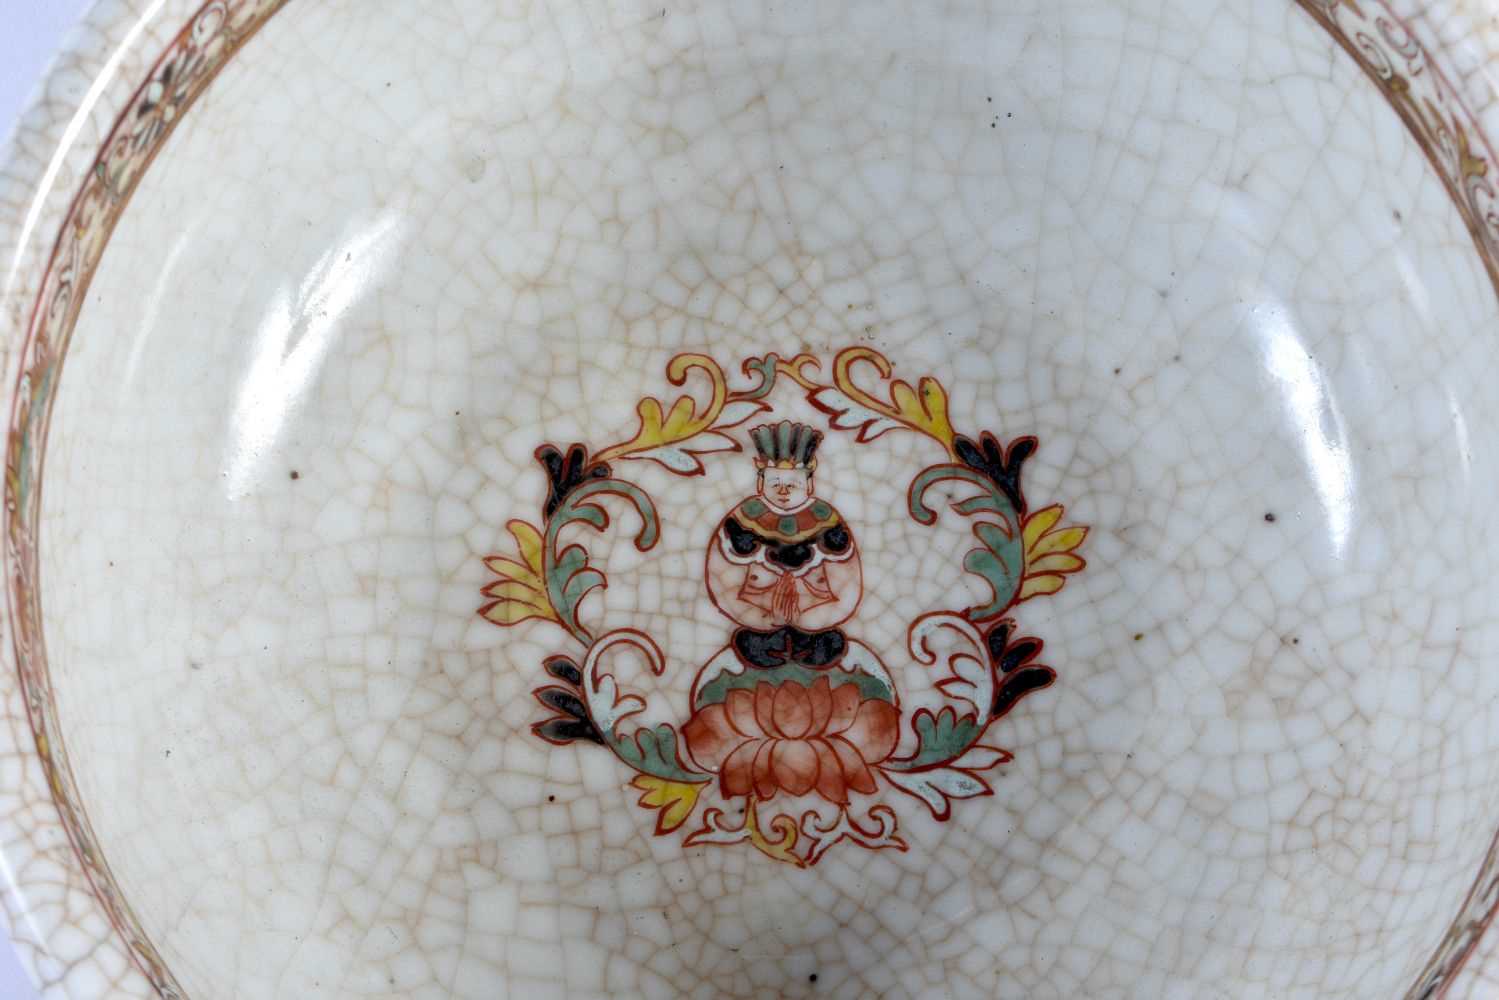 A CHINESE QING DYNASTY CRACKLED THAI MARKET BOWL painted with figures and foliage. 22 cm x 9 cm. - Image 3 of 5